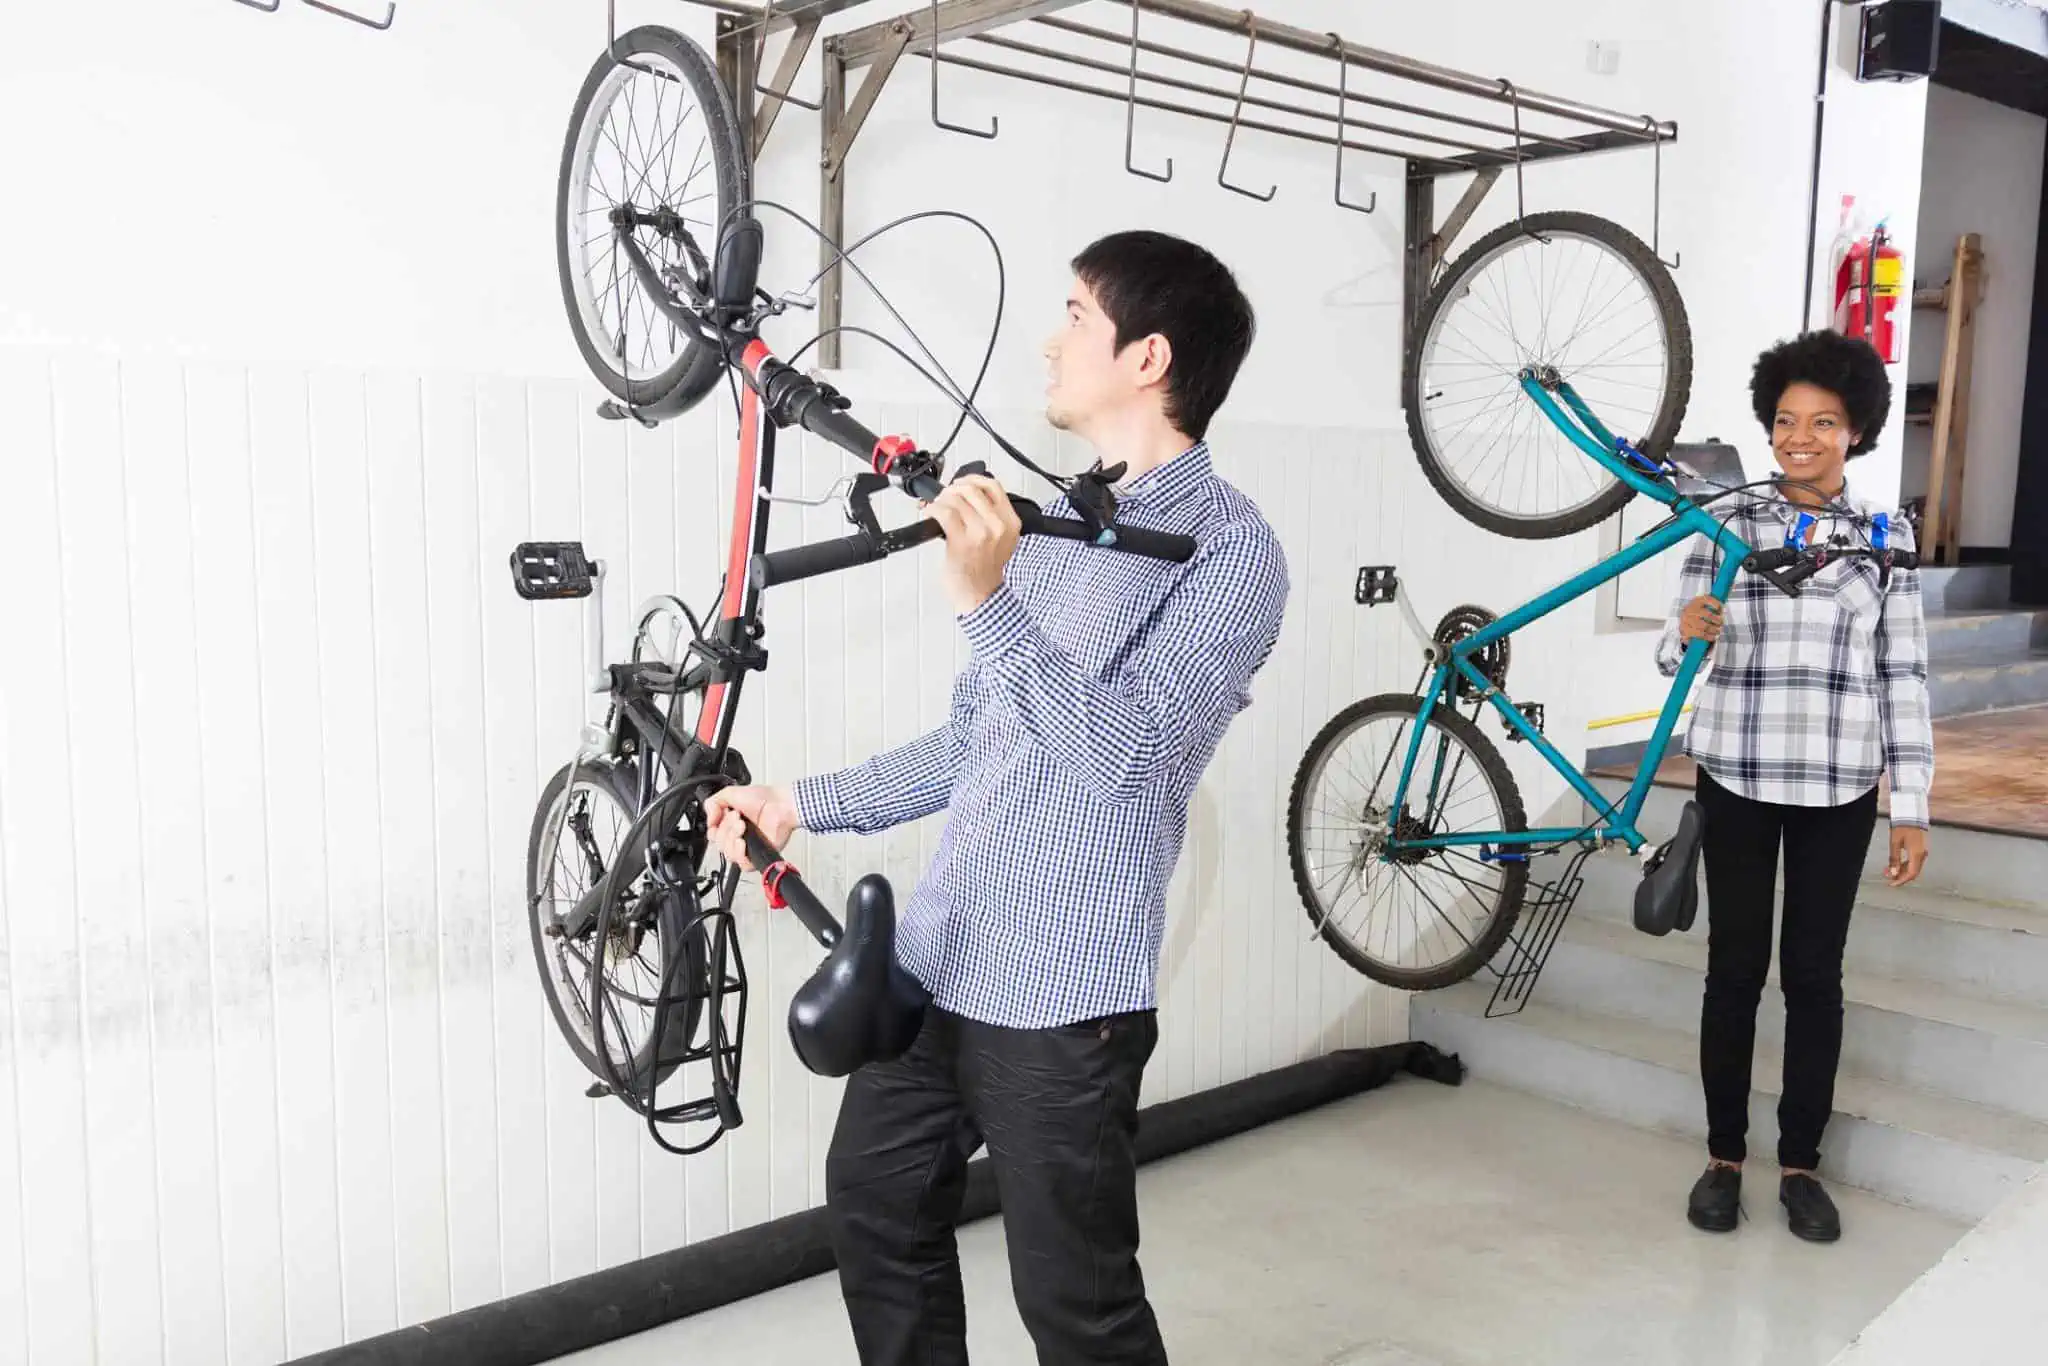 How to Hang a Bike in a Garage